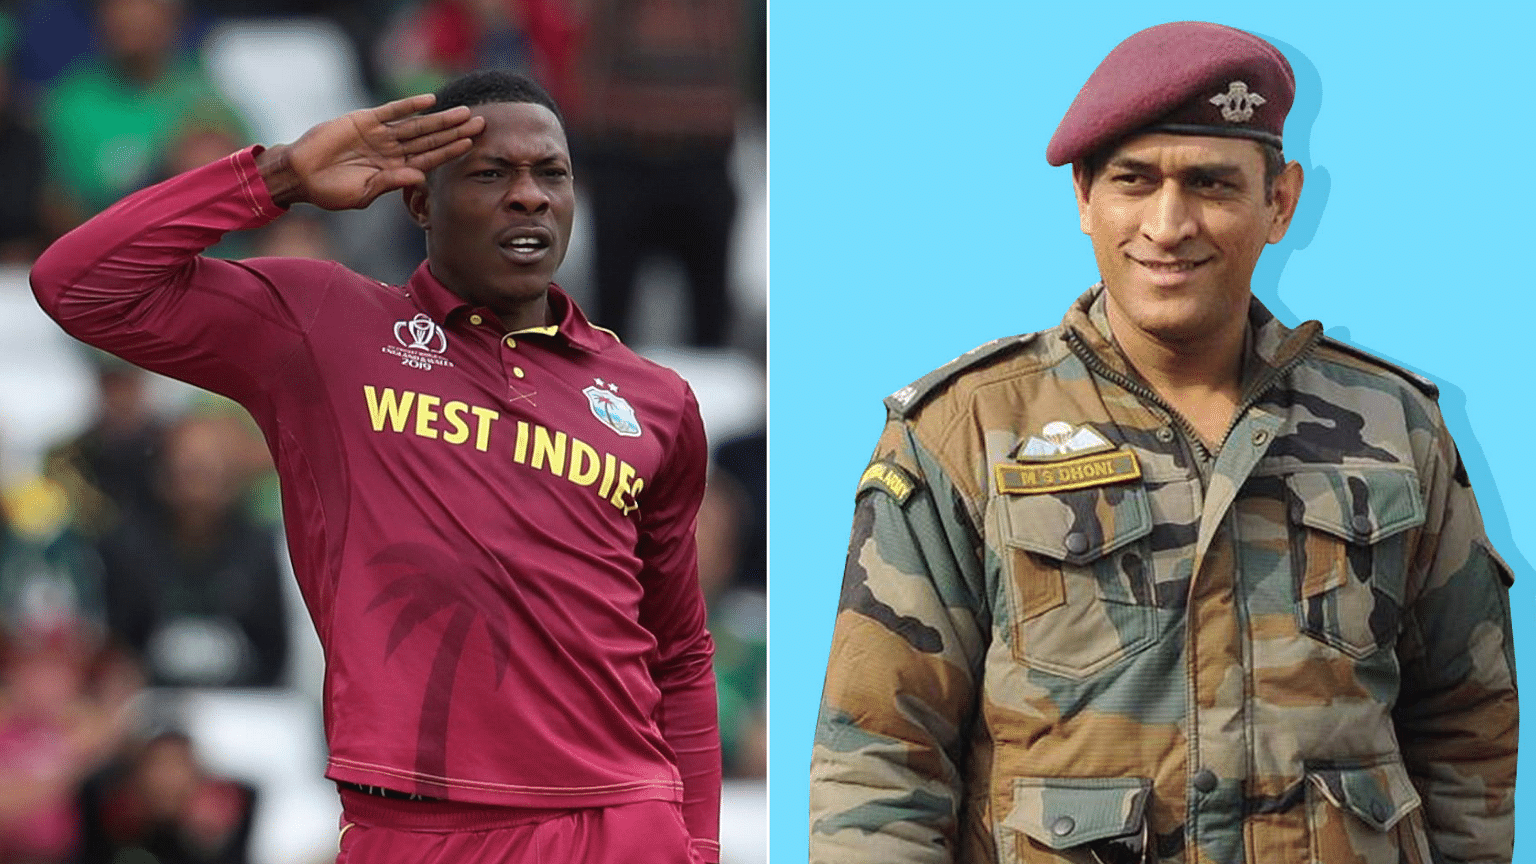 West Indies pacer Sheldon Cottrell has praised veteran Indian wicketkeeper-batsman MS Dhoni for his dedication and love for the Indian Army.